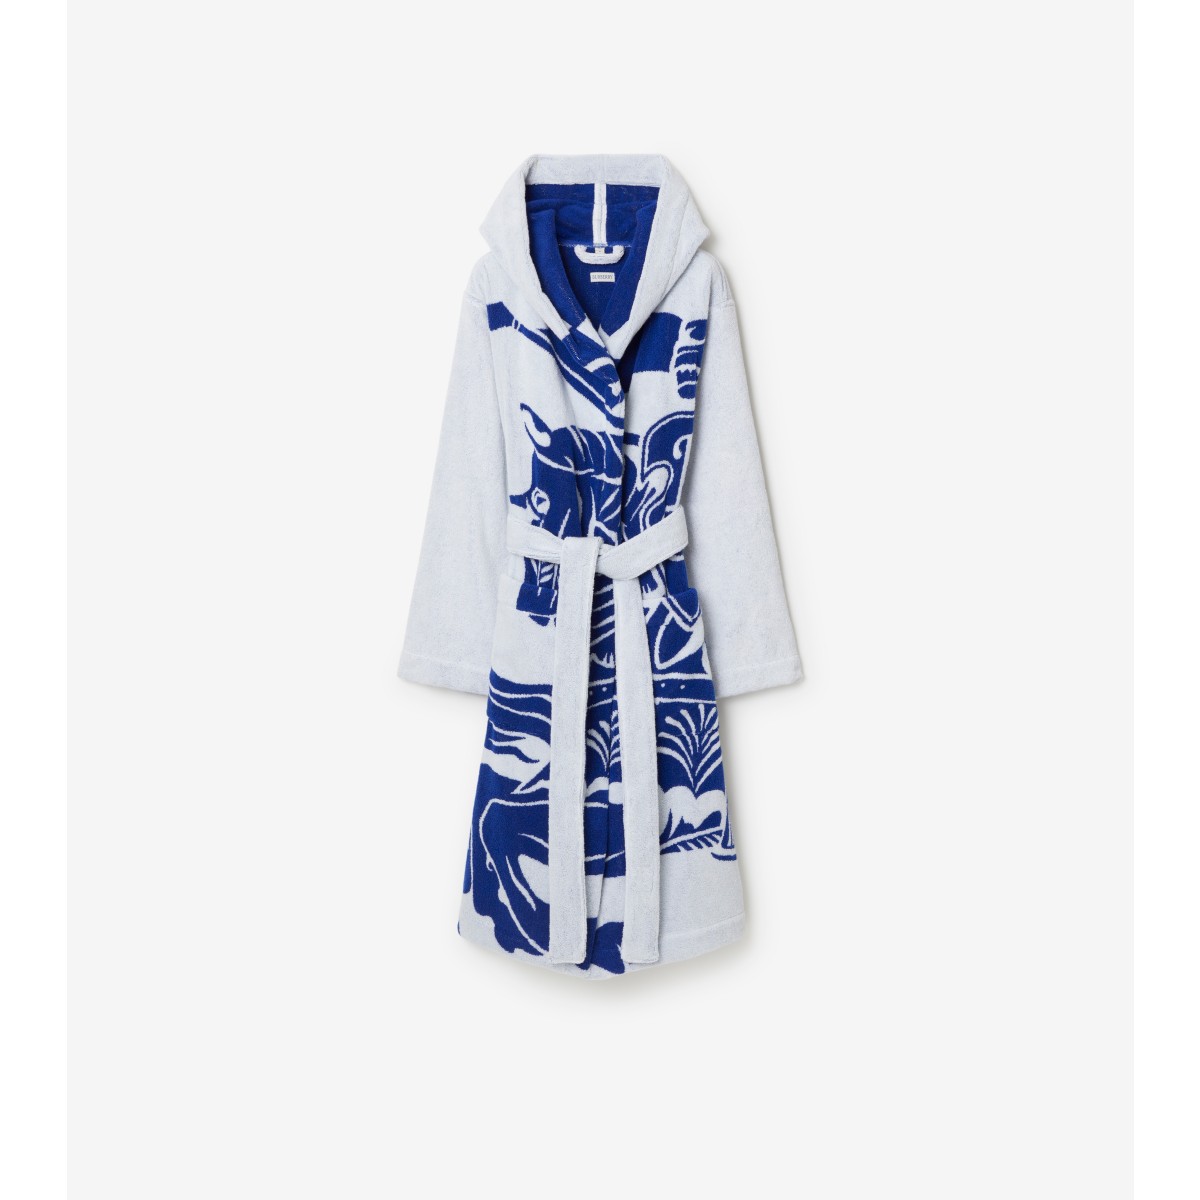 Burberry Ekd Hooded Dressing Gown In Knight